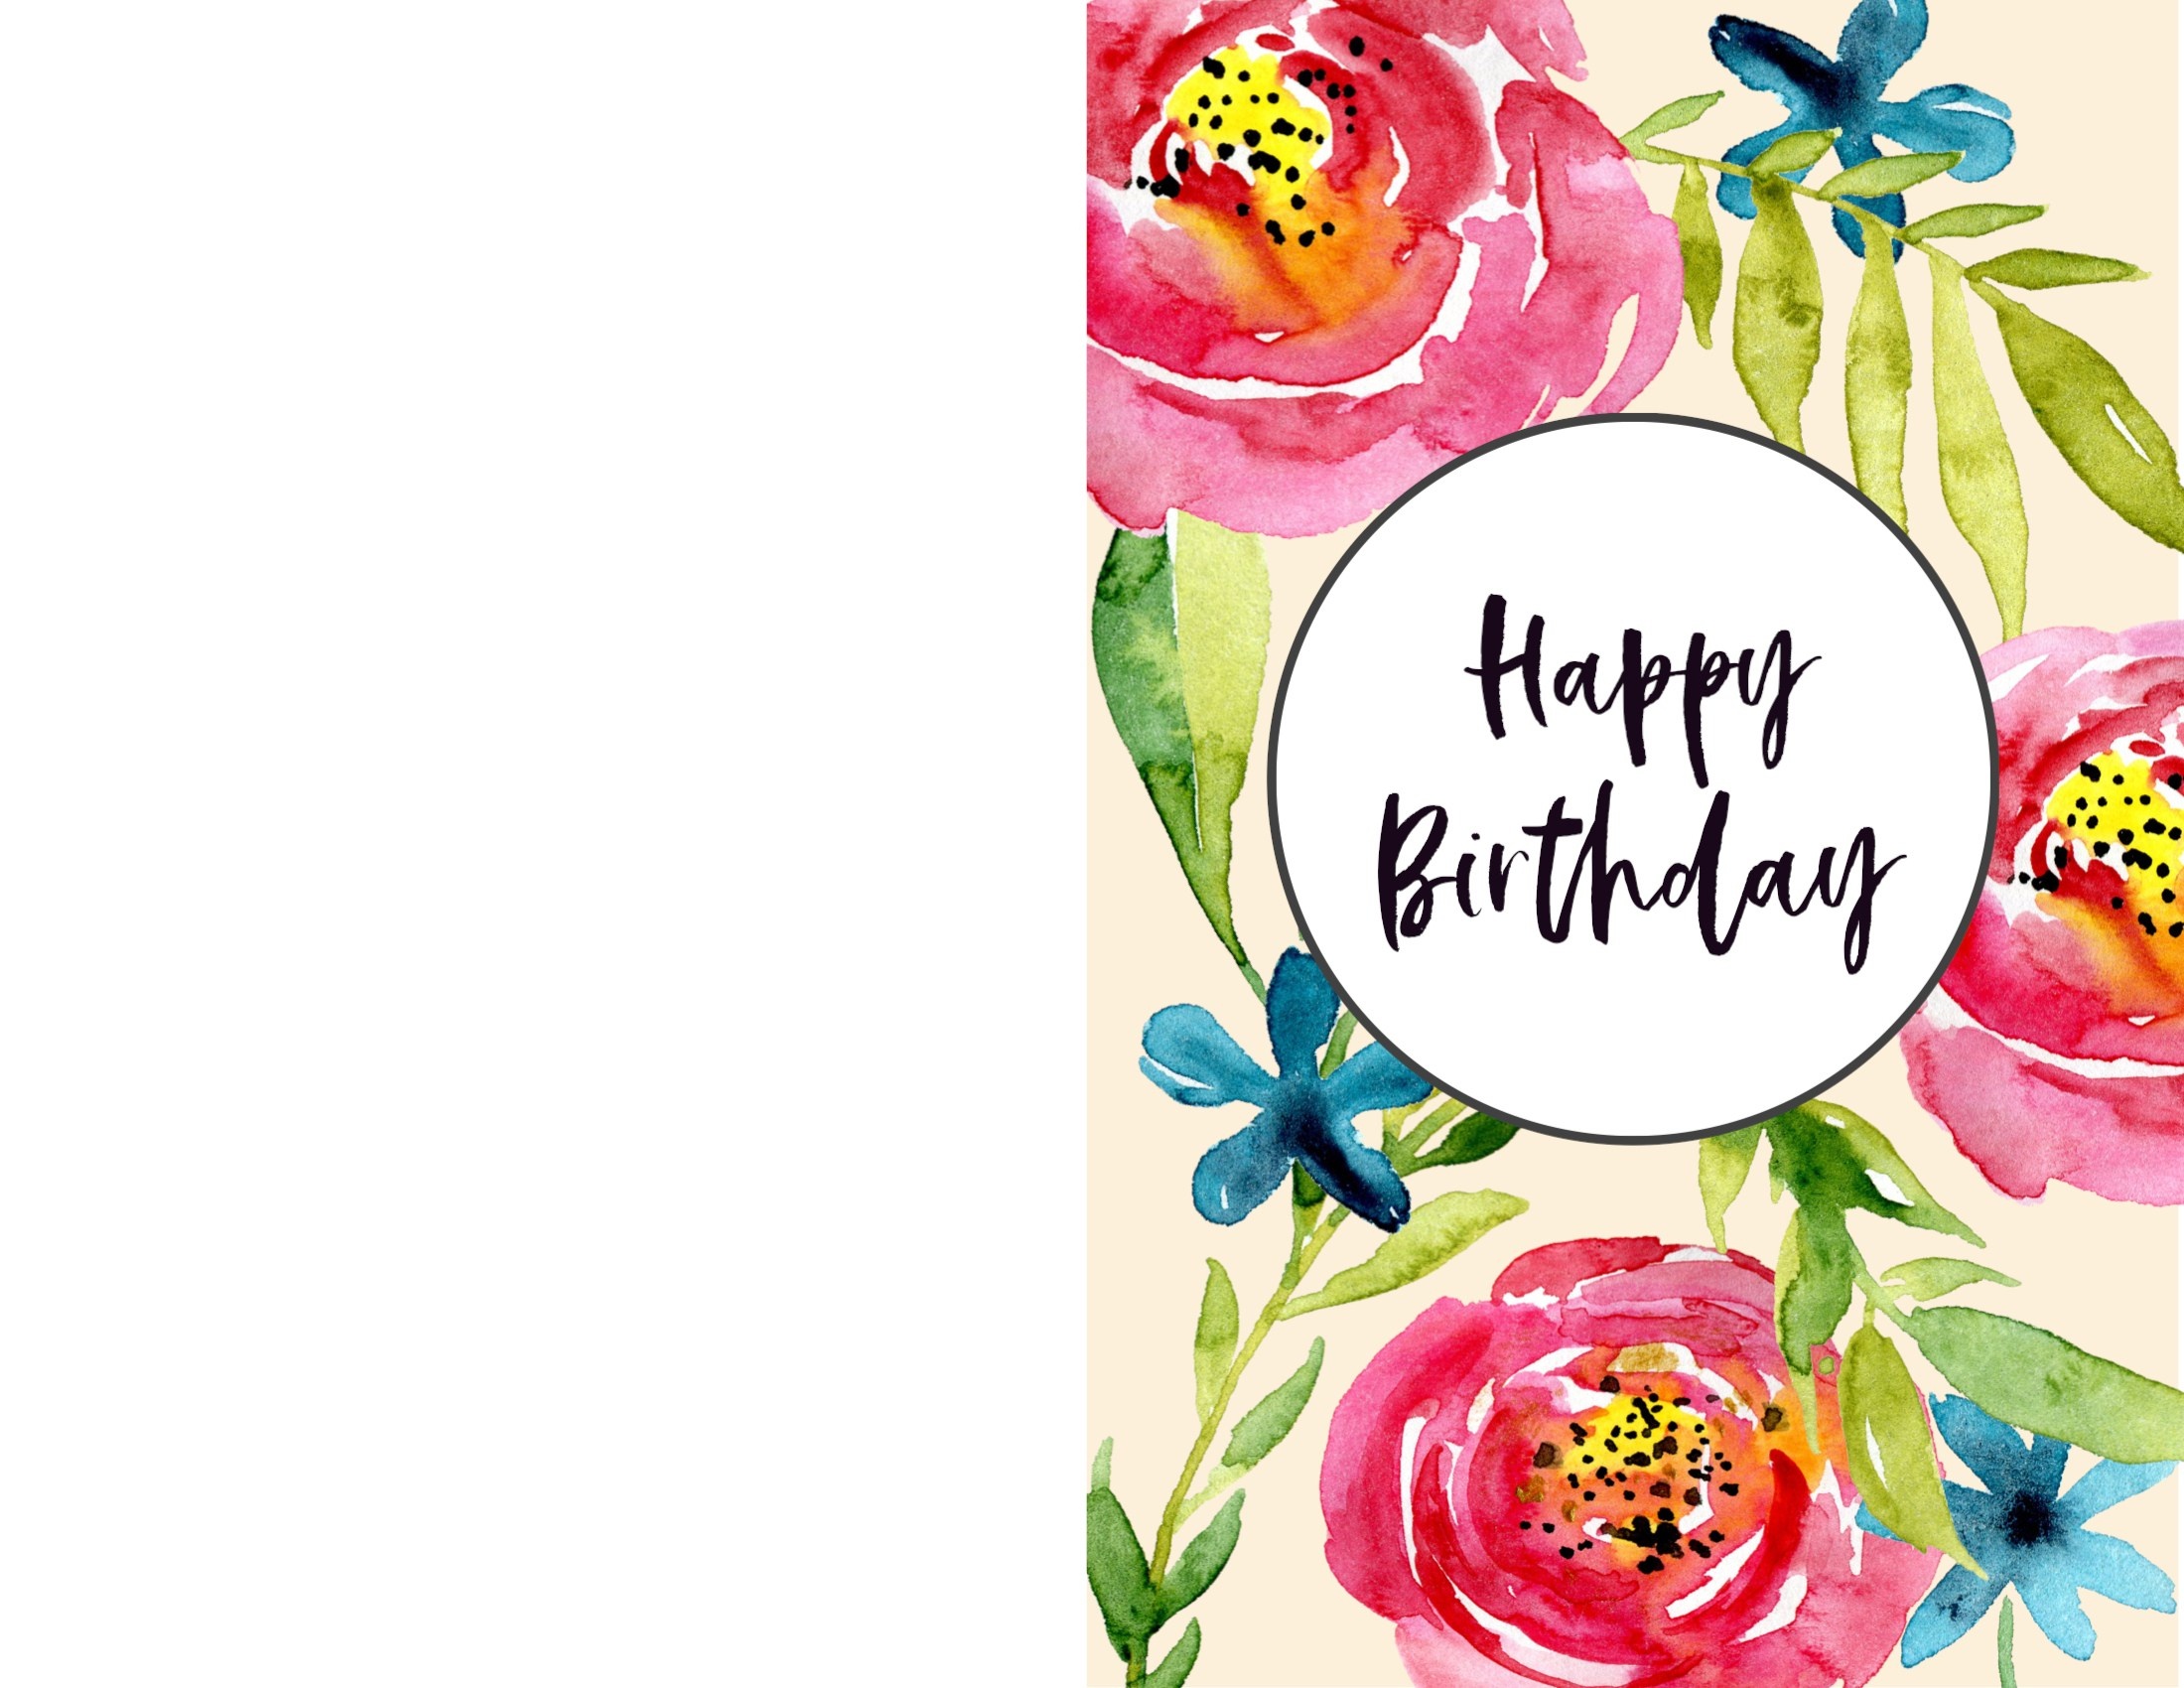 Free Printable Birthday Cards - Paper Trail Design - Happy Birthday Free Cards Printable